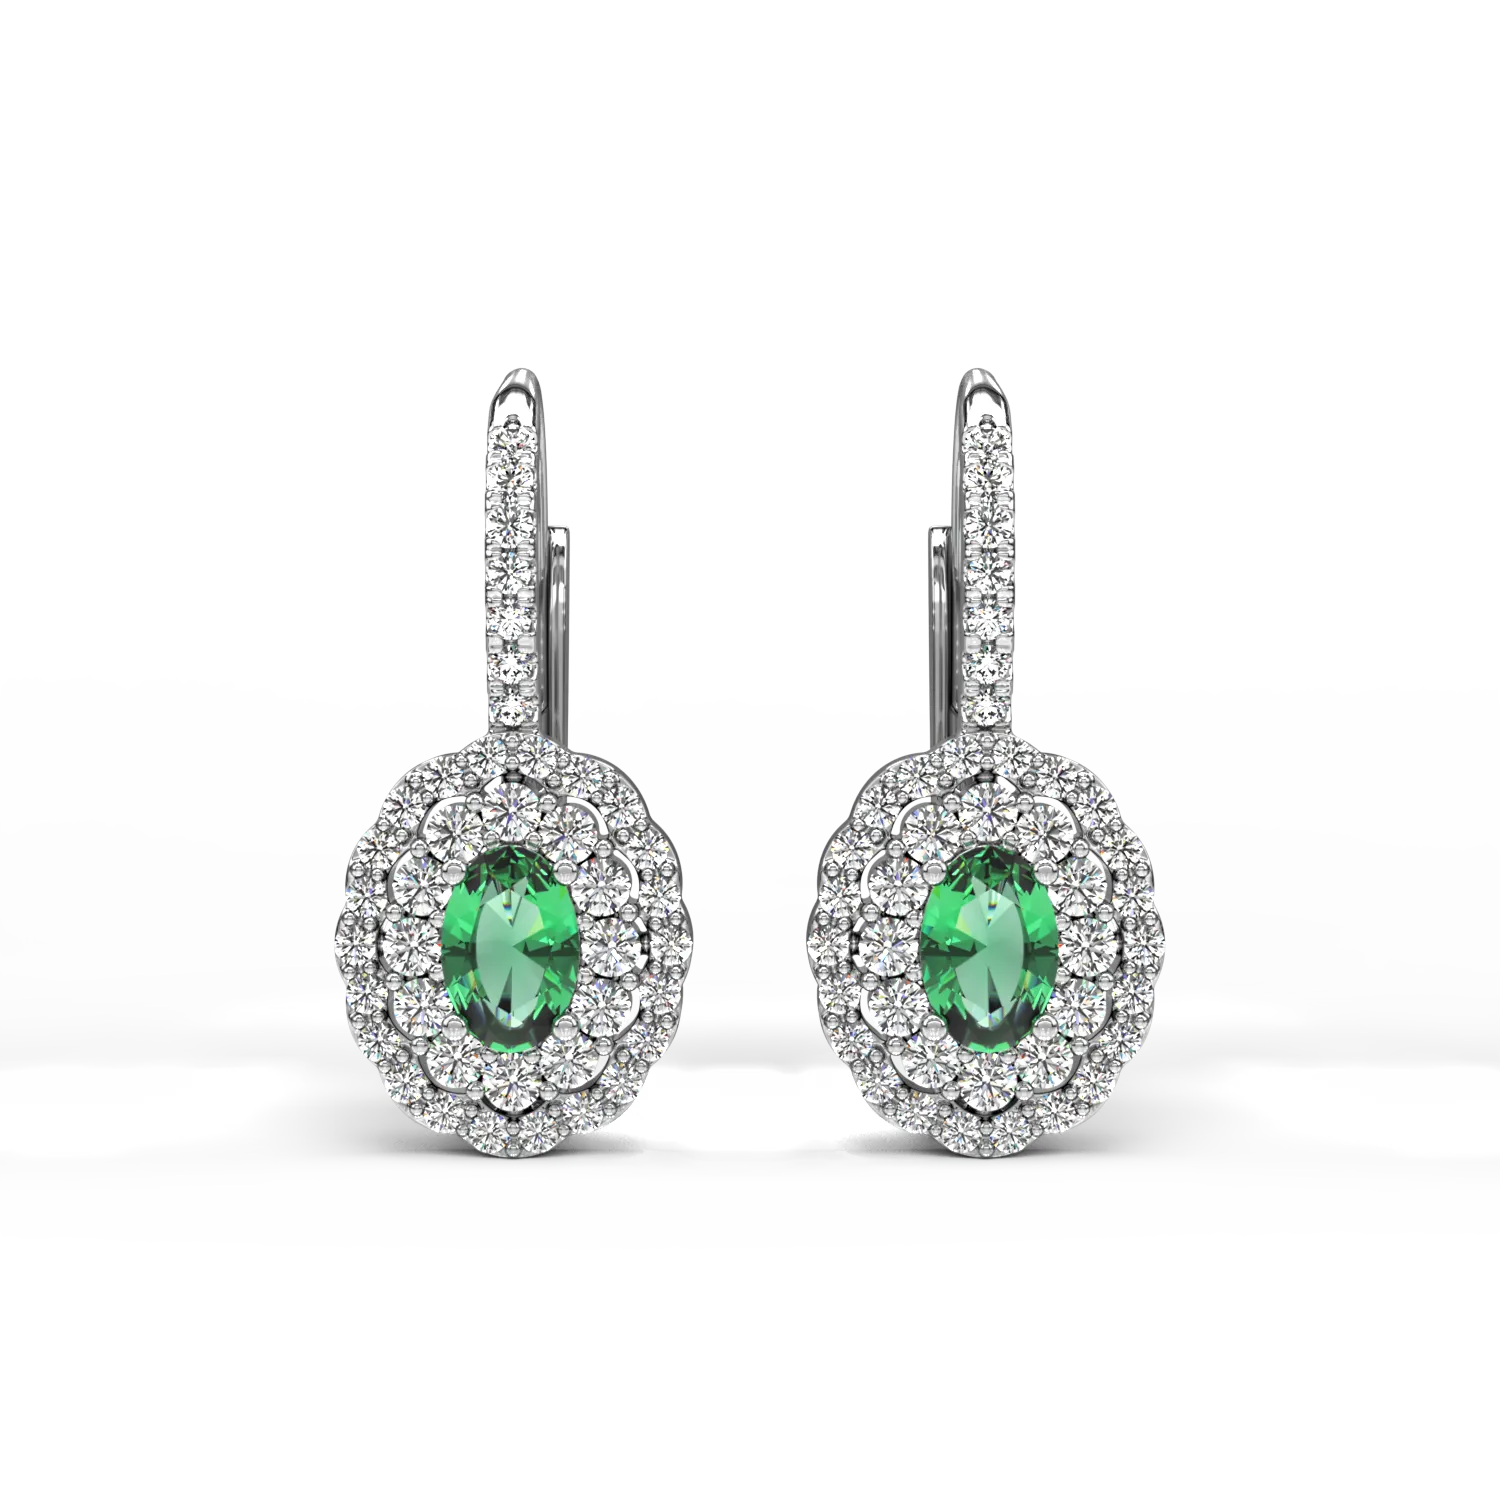 18K white gold earrings with 0.64ct emeralds and 0.84ct diamonds